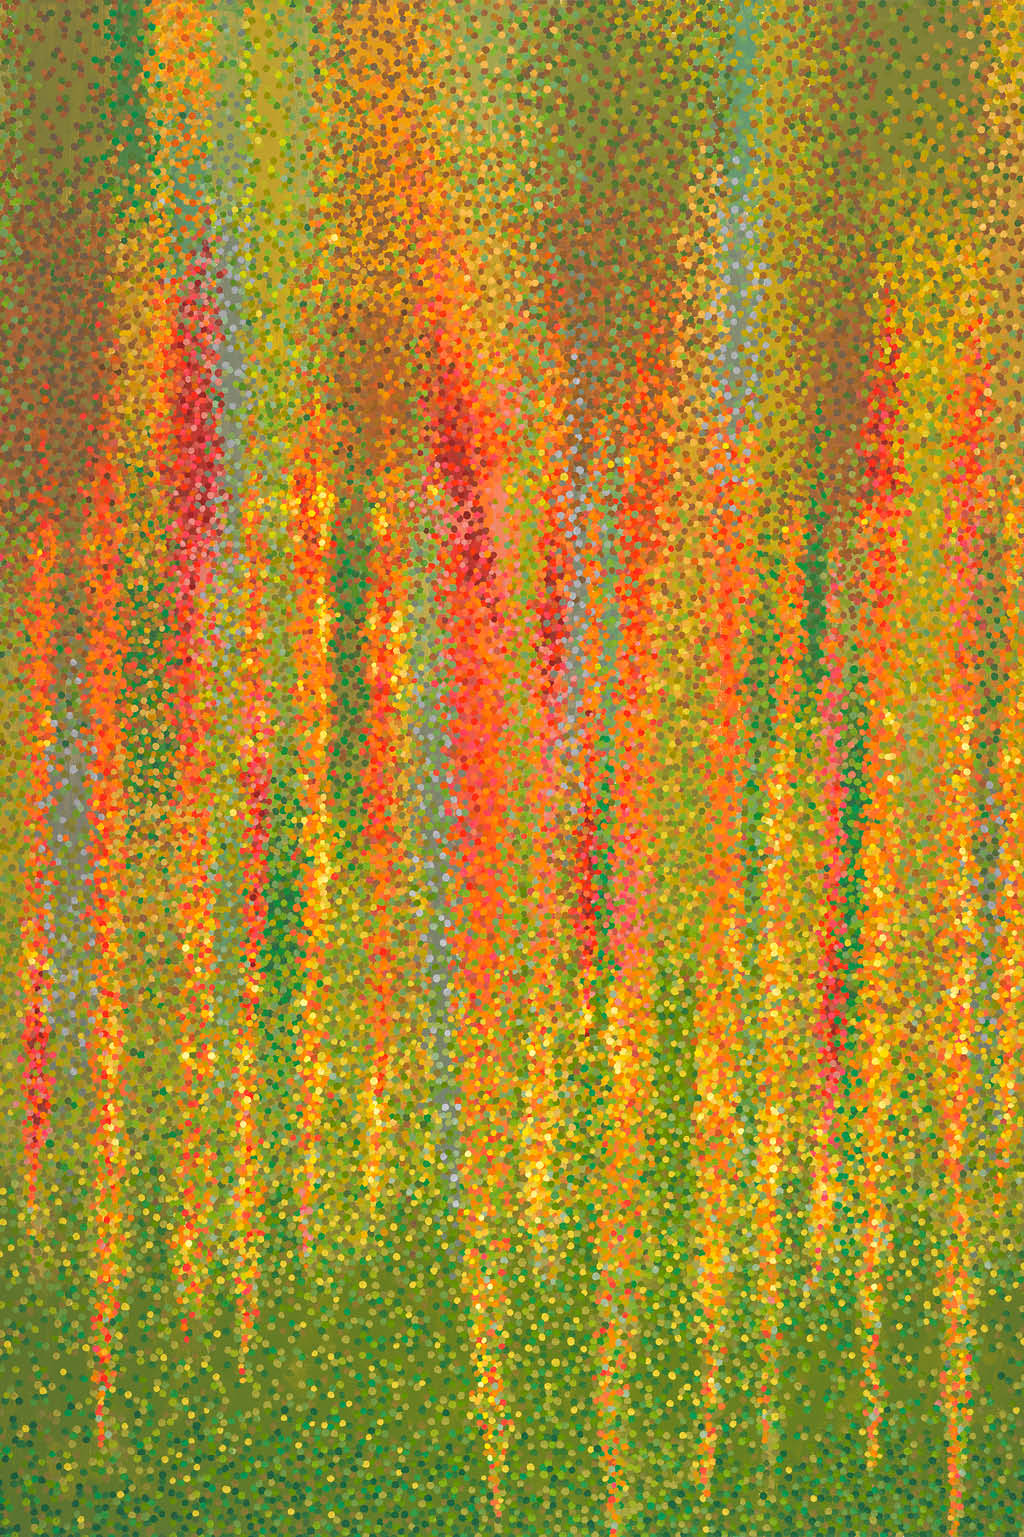 orange-green-and-yellow-dots-painting